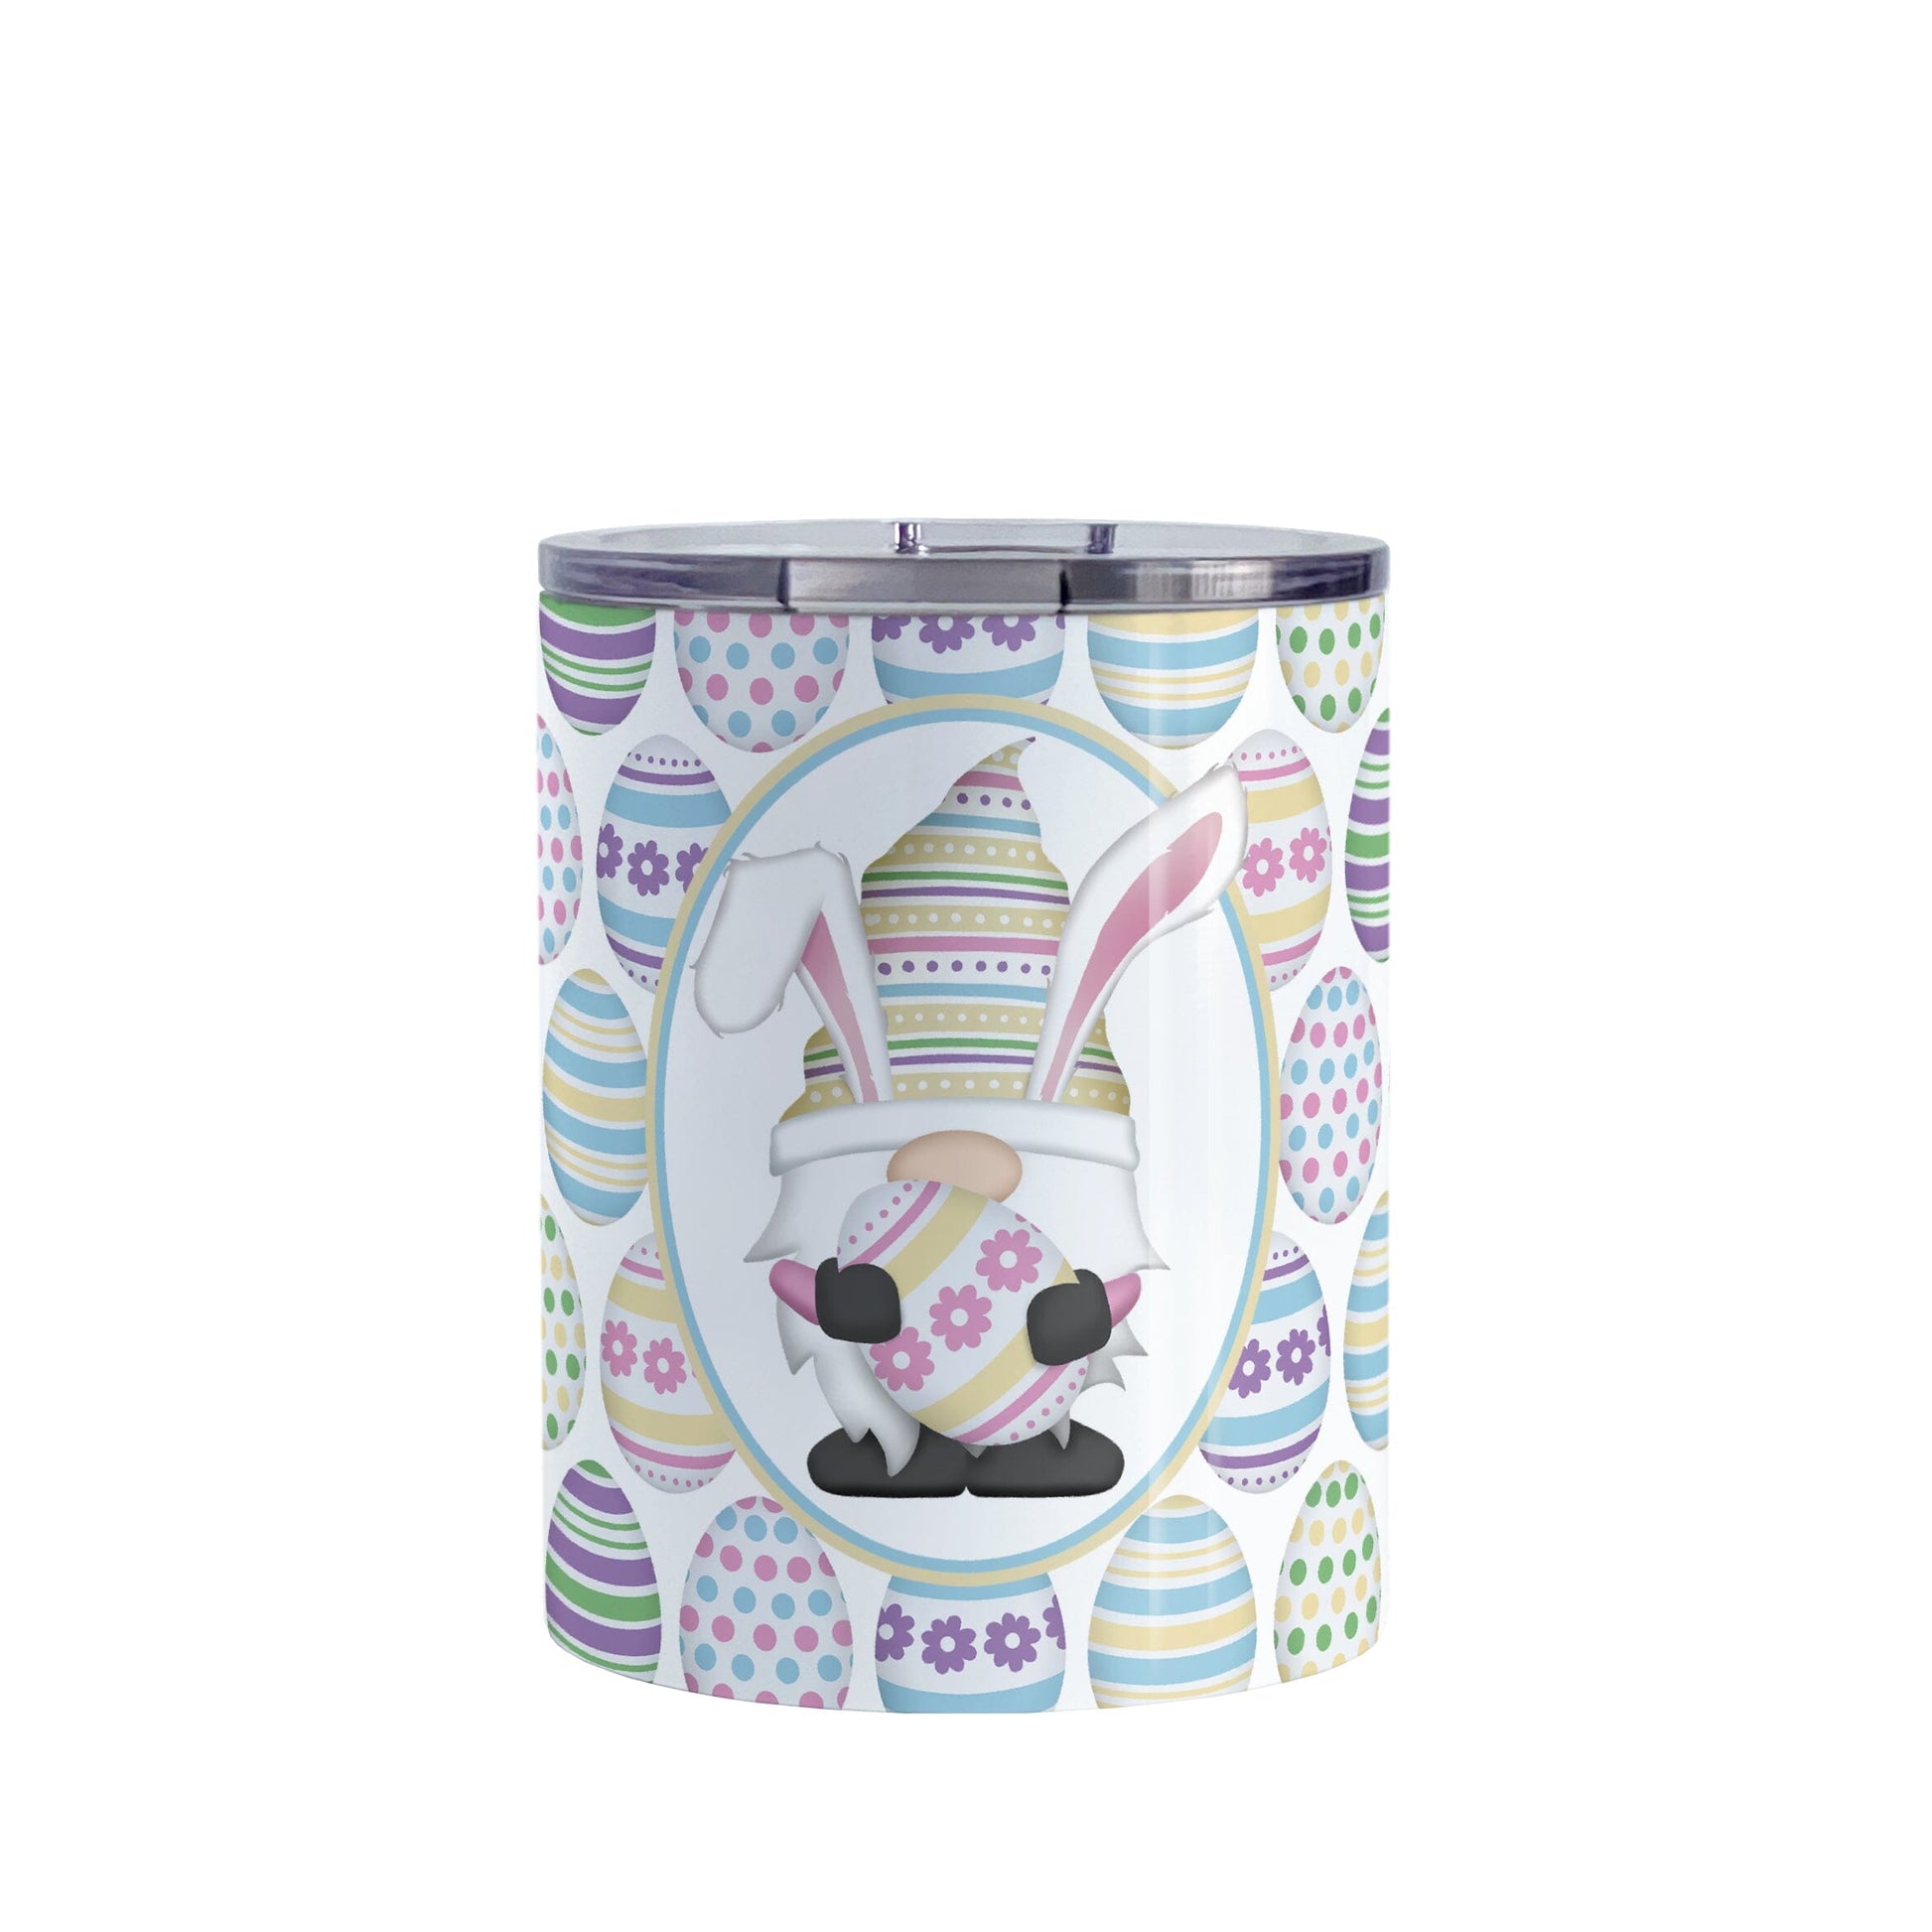 Easter Gnome Eggs Tumbler Cup (10oz) at Amy's Coffee Mugs. A stainless steel tumbler cup designed with an illustration of an adorable gnome with bunny ears, holding a large pink and yellow Easter egg, in a white oval over a decorated Easter eggs pattern that wraps around the cup.